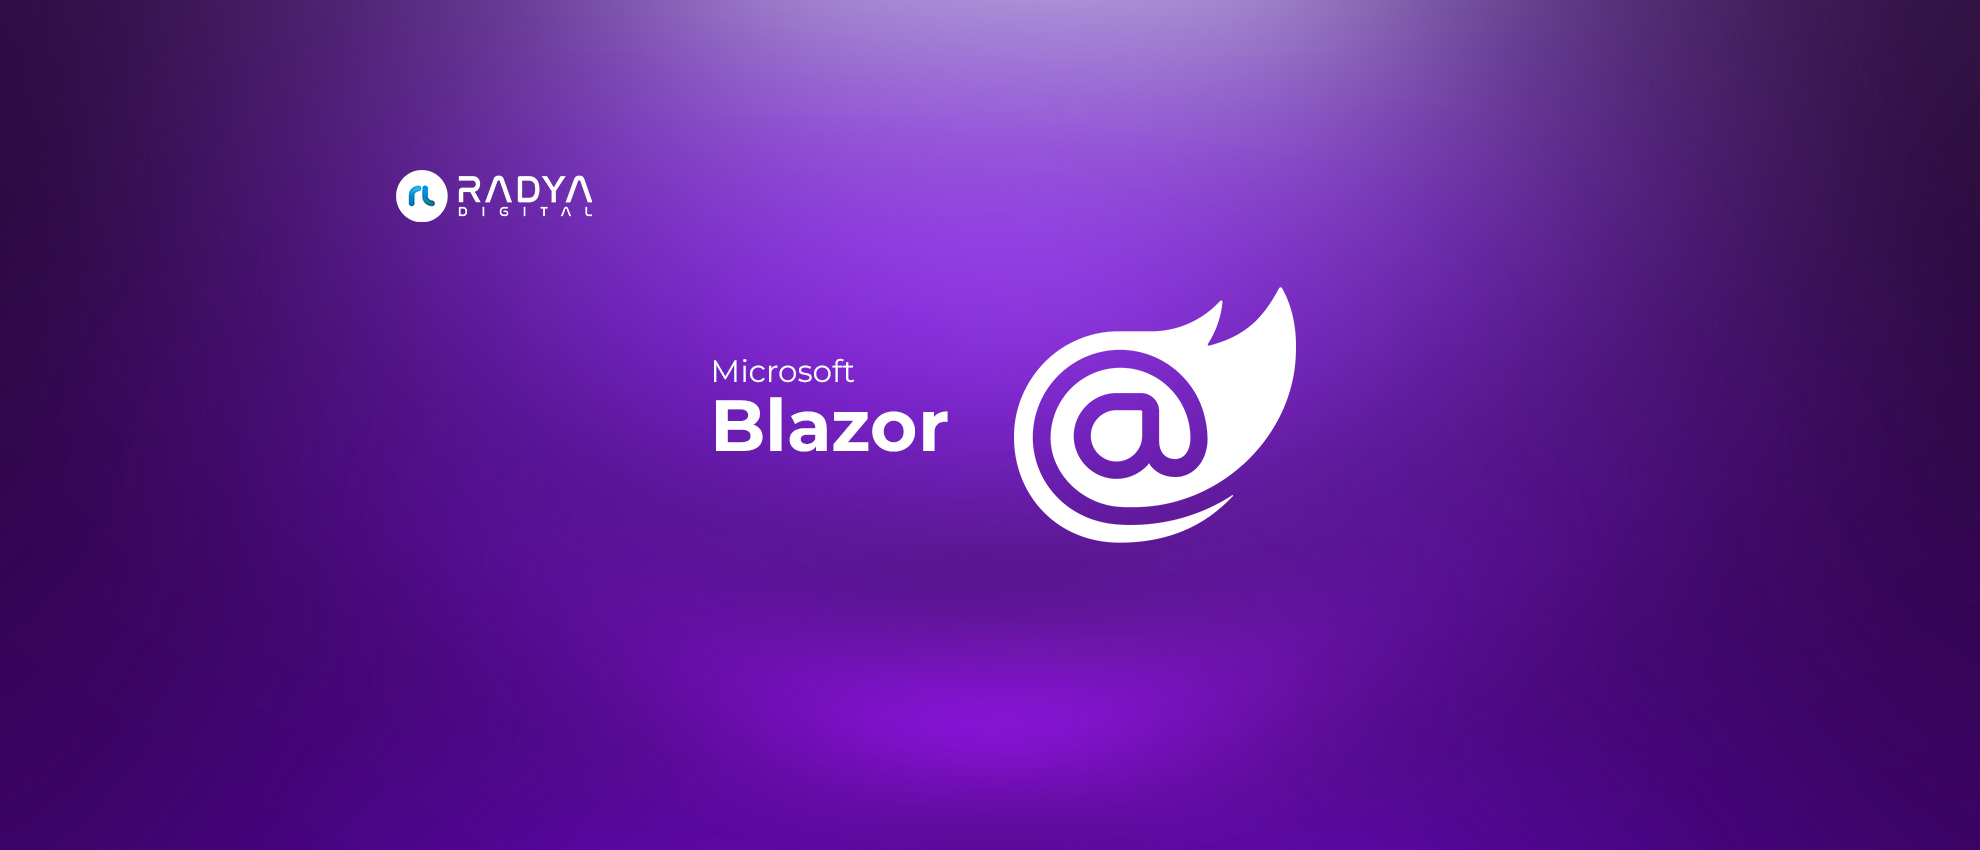 Image of Get to know Blazor, a Frontend Framework from Microsoft